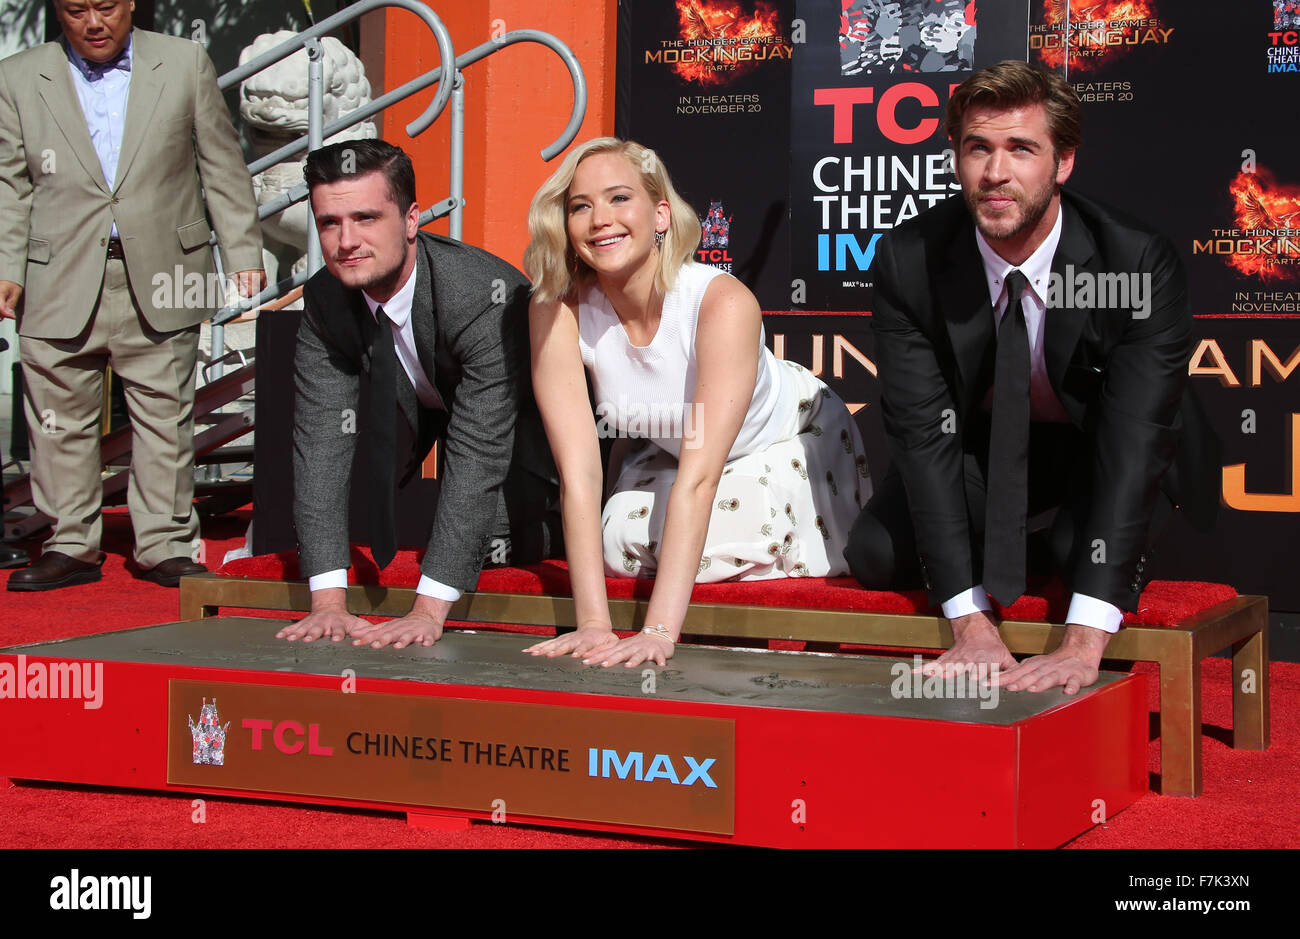 Photos from The Hunger Games: Mockingjay Part 2 Premieres